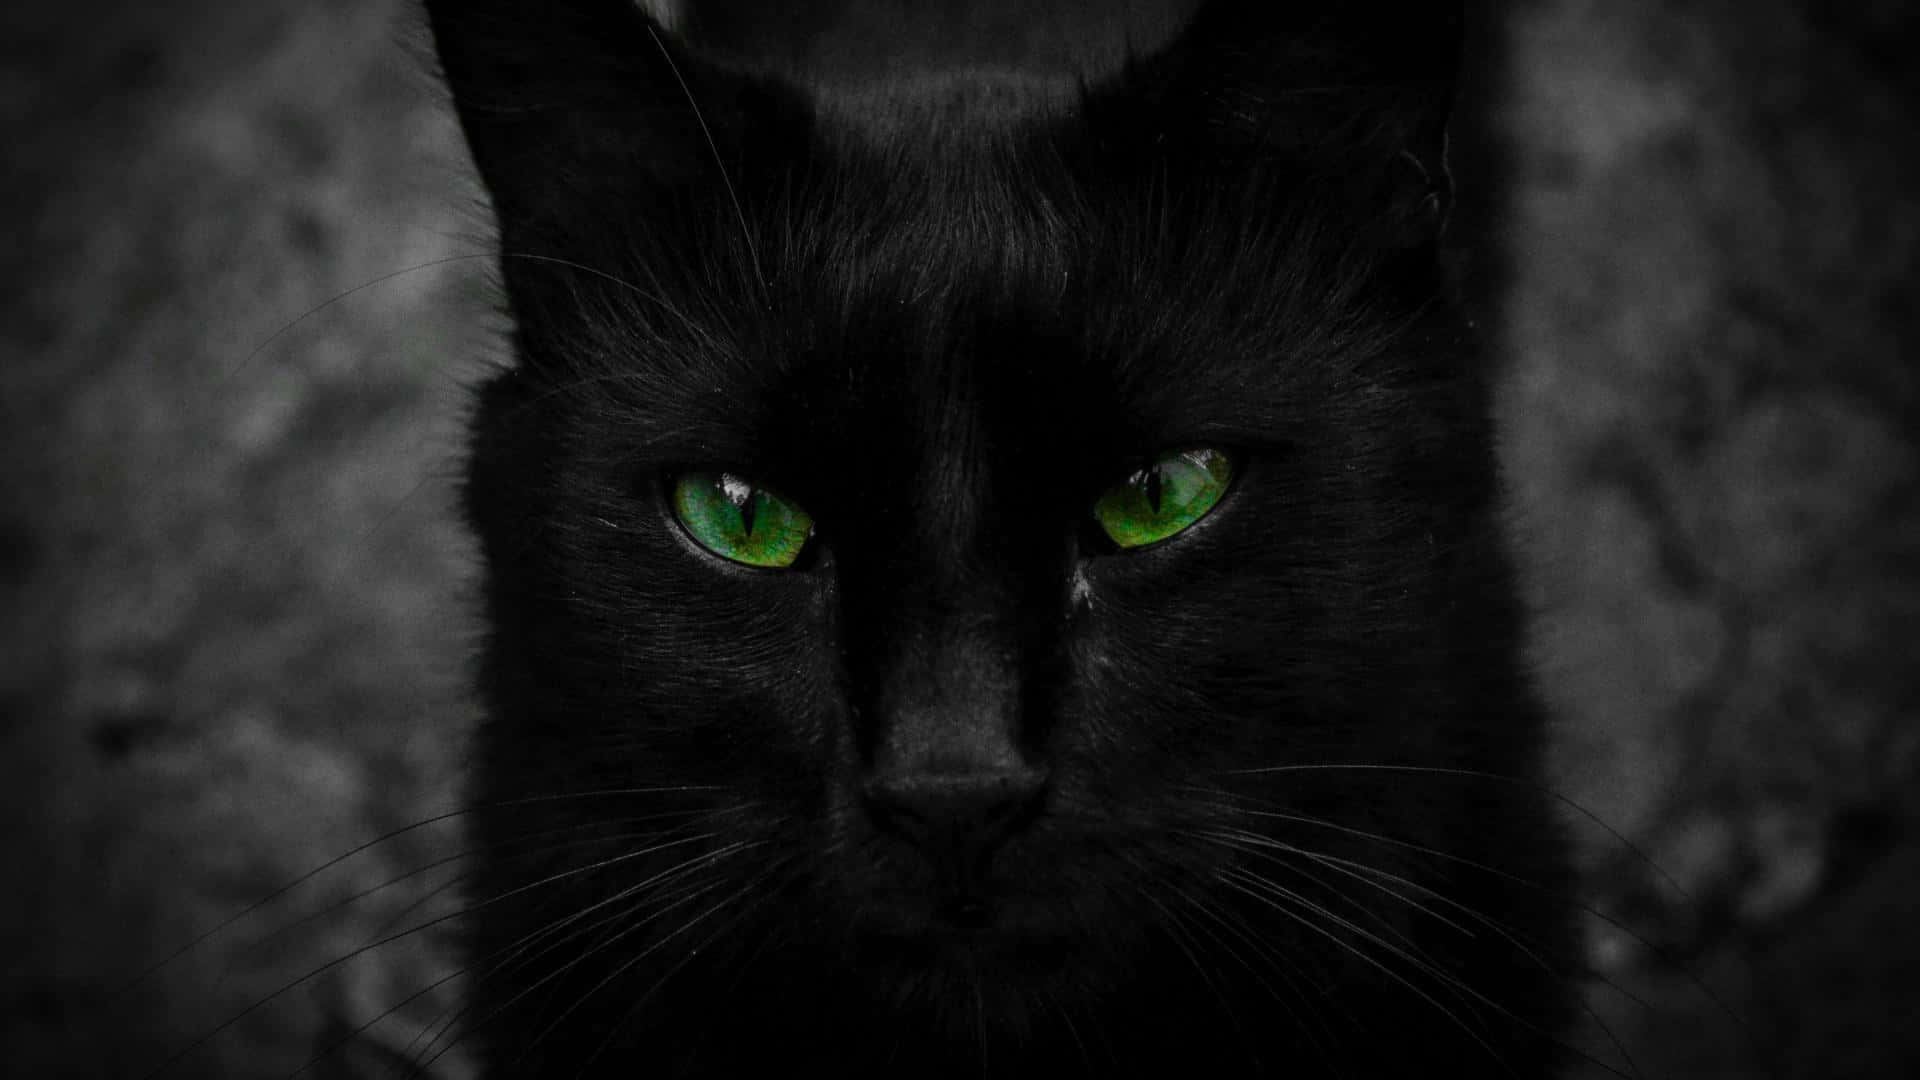 "The Independent Gaze of a Black Cat"